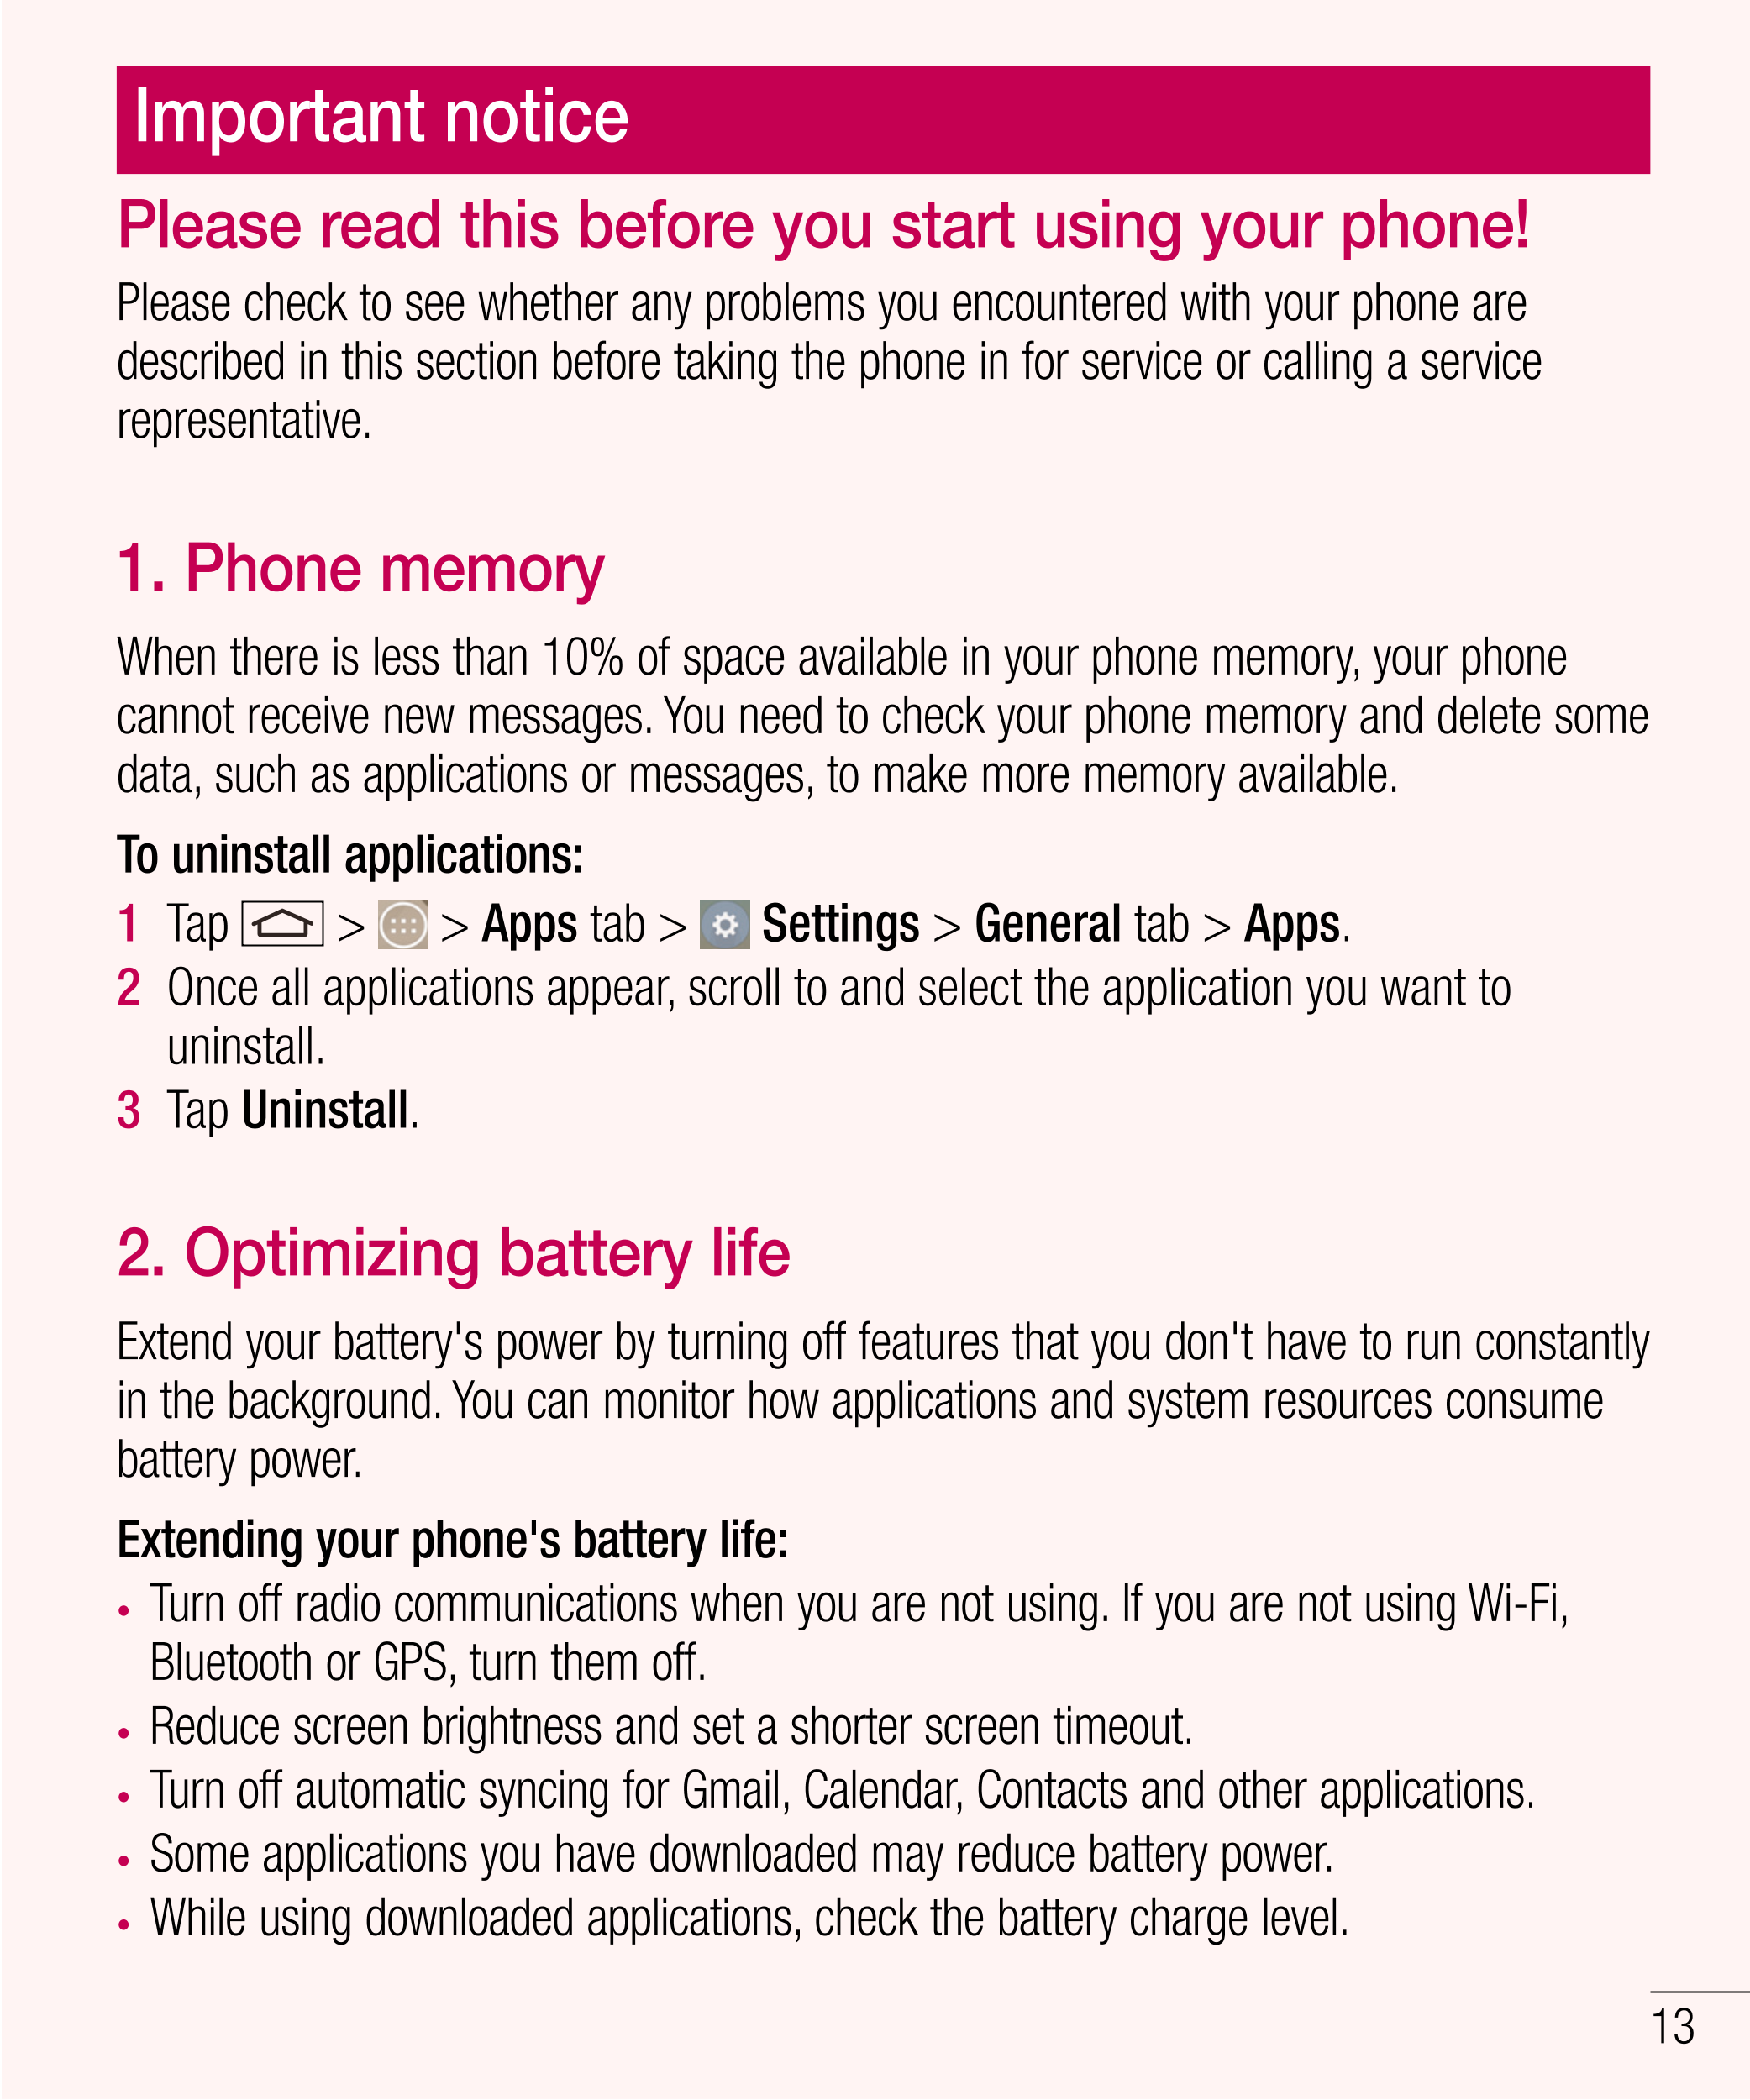 Important notice
Please read this before you start using your phone!
Please check to see whether any problems you encountered wi